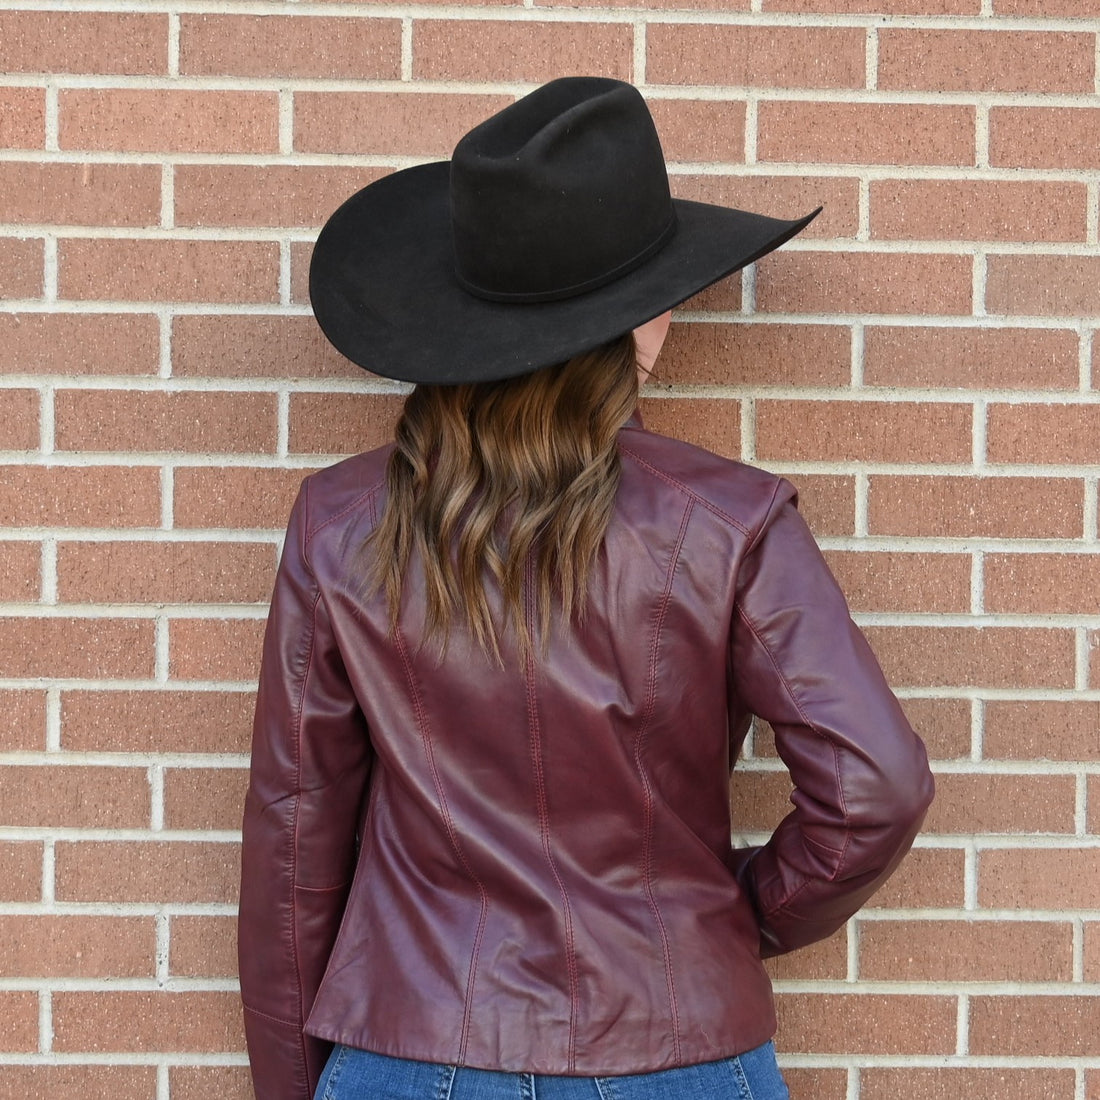 Ladies Lightweight Leather Jacket with Zip Front in Merlot view of back